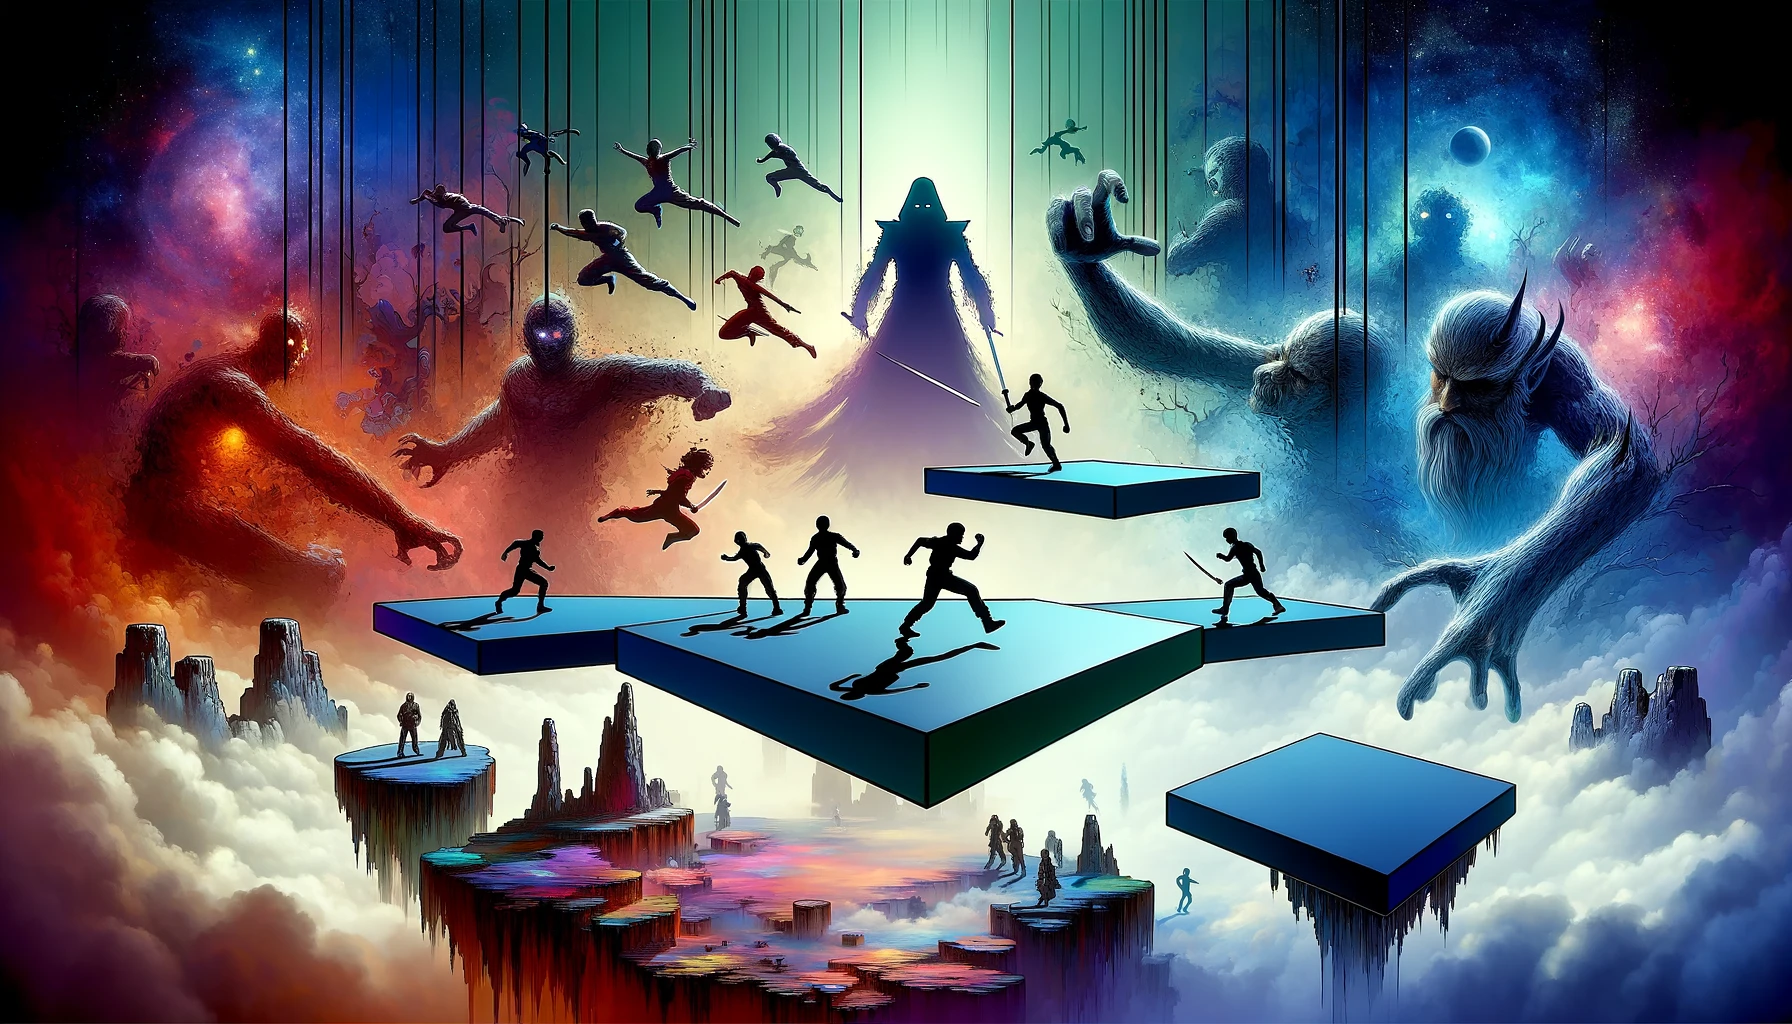 Image showing three flat horizontal platforms suspended in space with character figurines in various dynamic poses. Behind the platforms, a mysterious, misty silhouette of a dominant player looms over the scene in a colorful and detailed space.